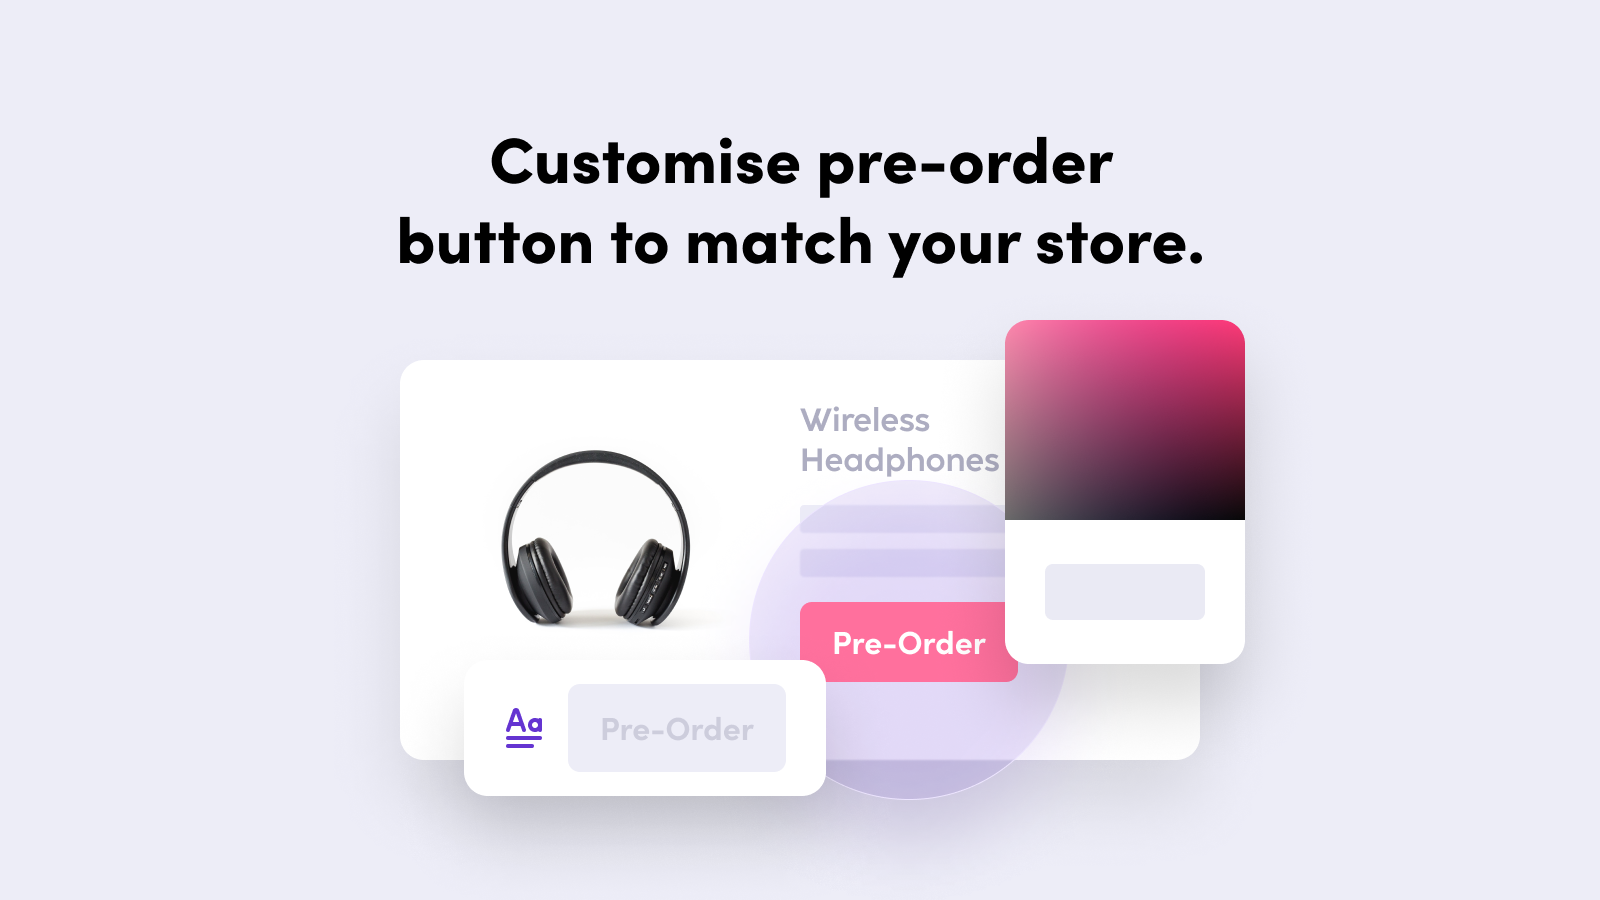 Customise pre-order button to match your store.